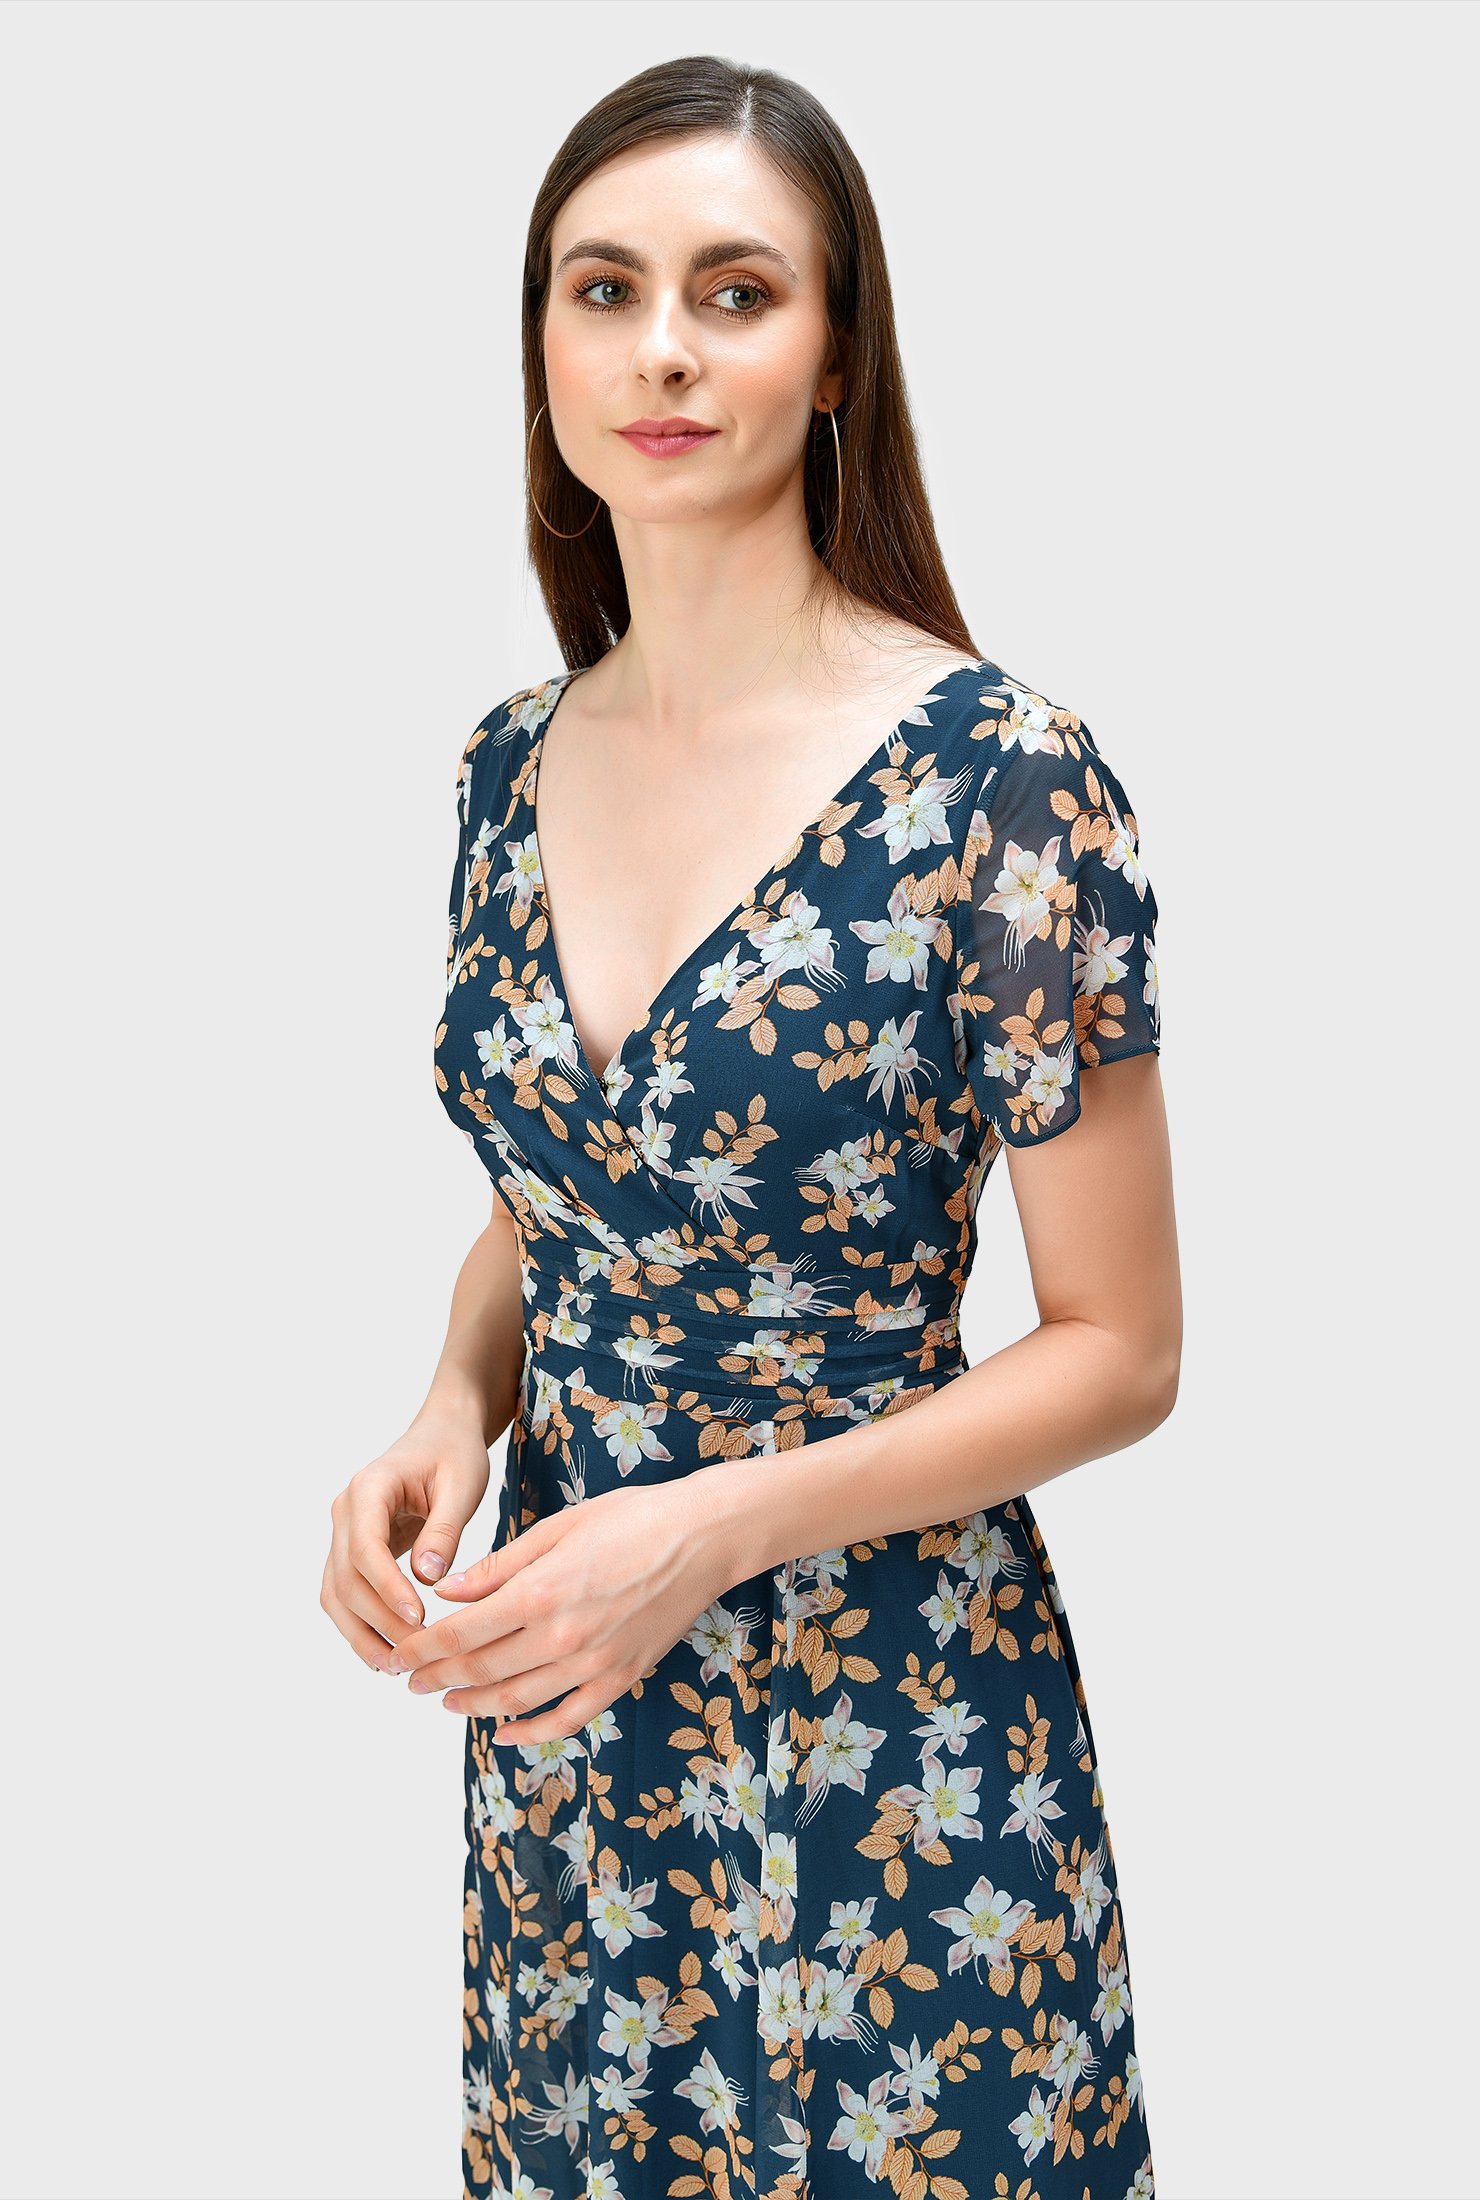 Our floral print georgette dress with lattice trim at the floaty handkerchief hem is designed with effortlessly flattering surplice styling and a full flare skirt.